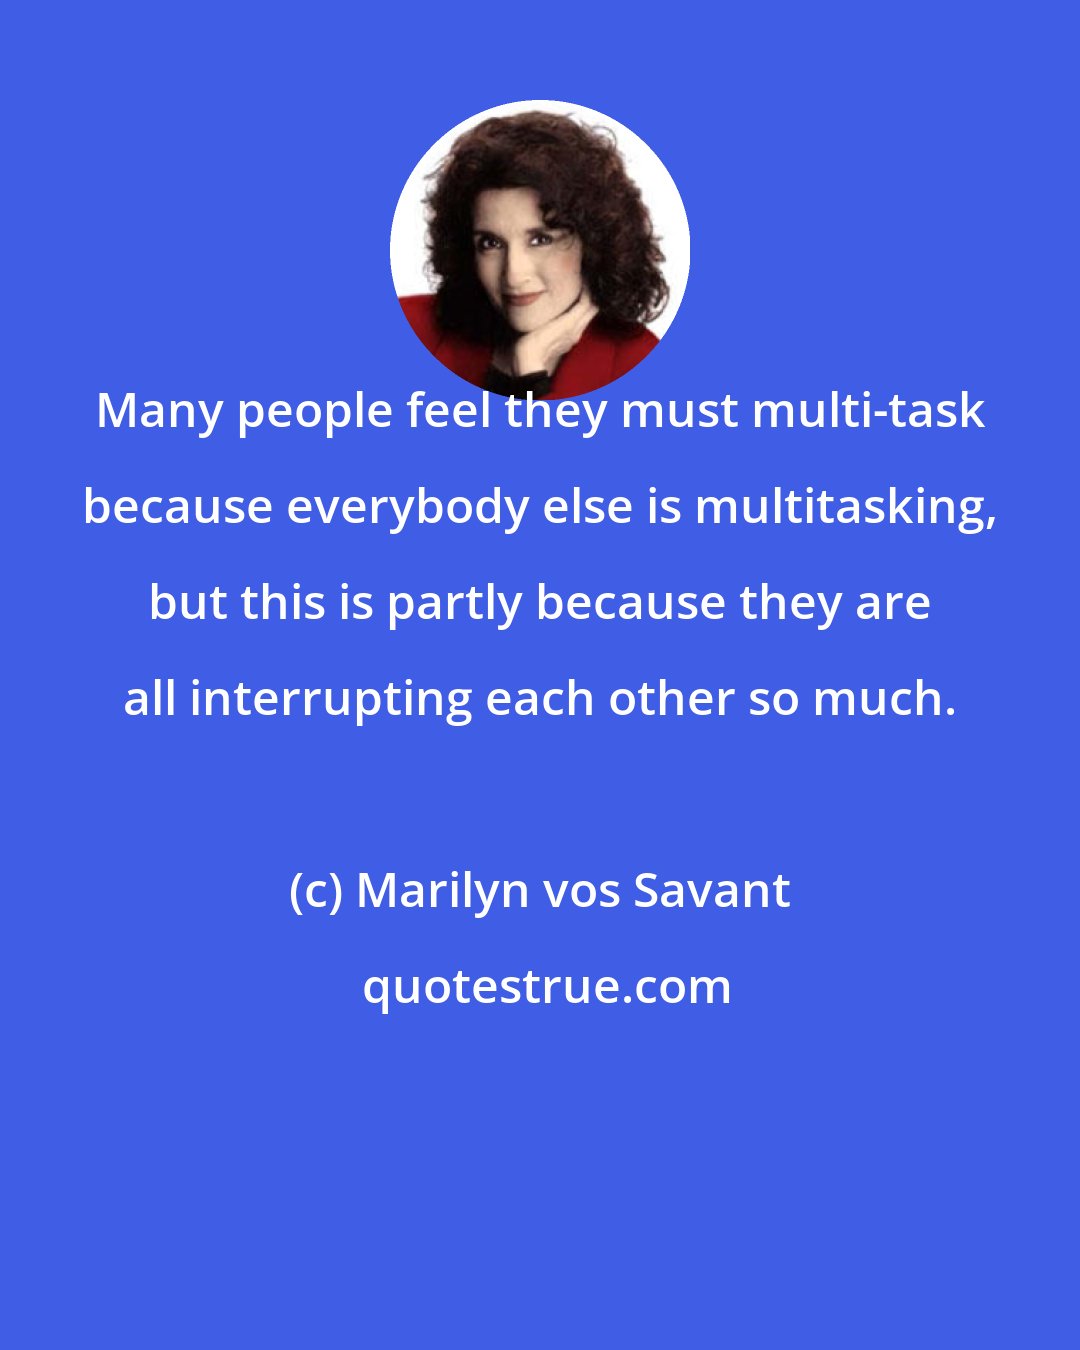 Marilyn vos Savant: Many people feel they must multi-task because everybody else is multitasking, but this is partly because they are all interrupting each other so much.